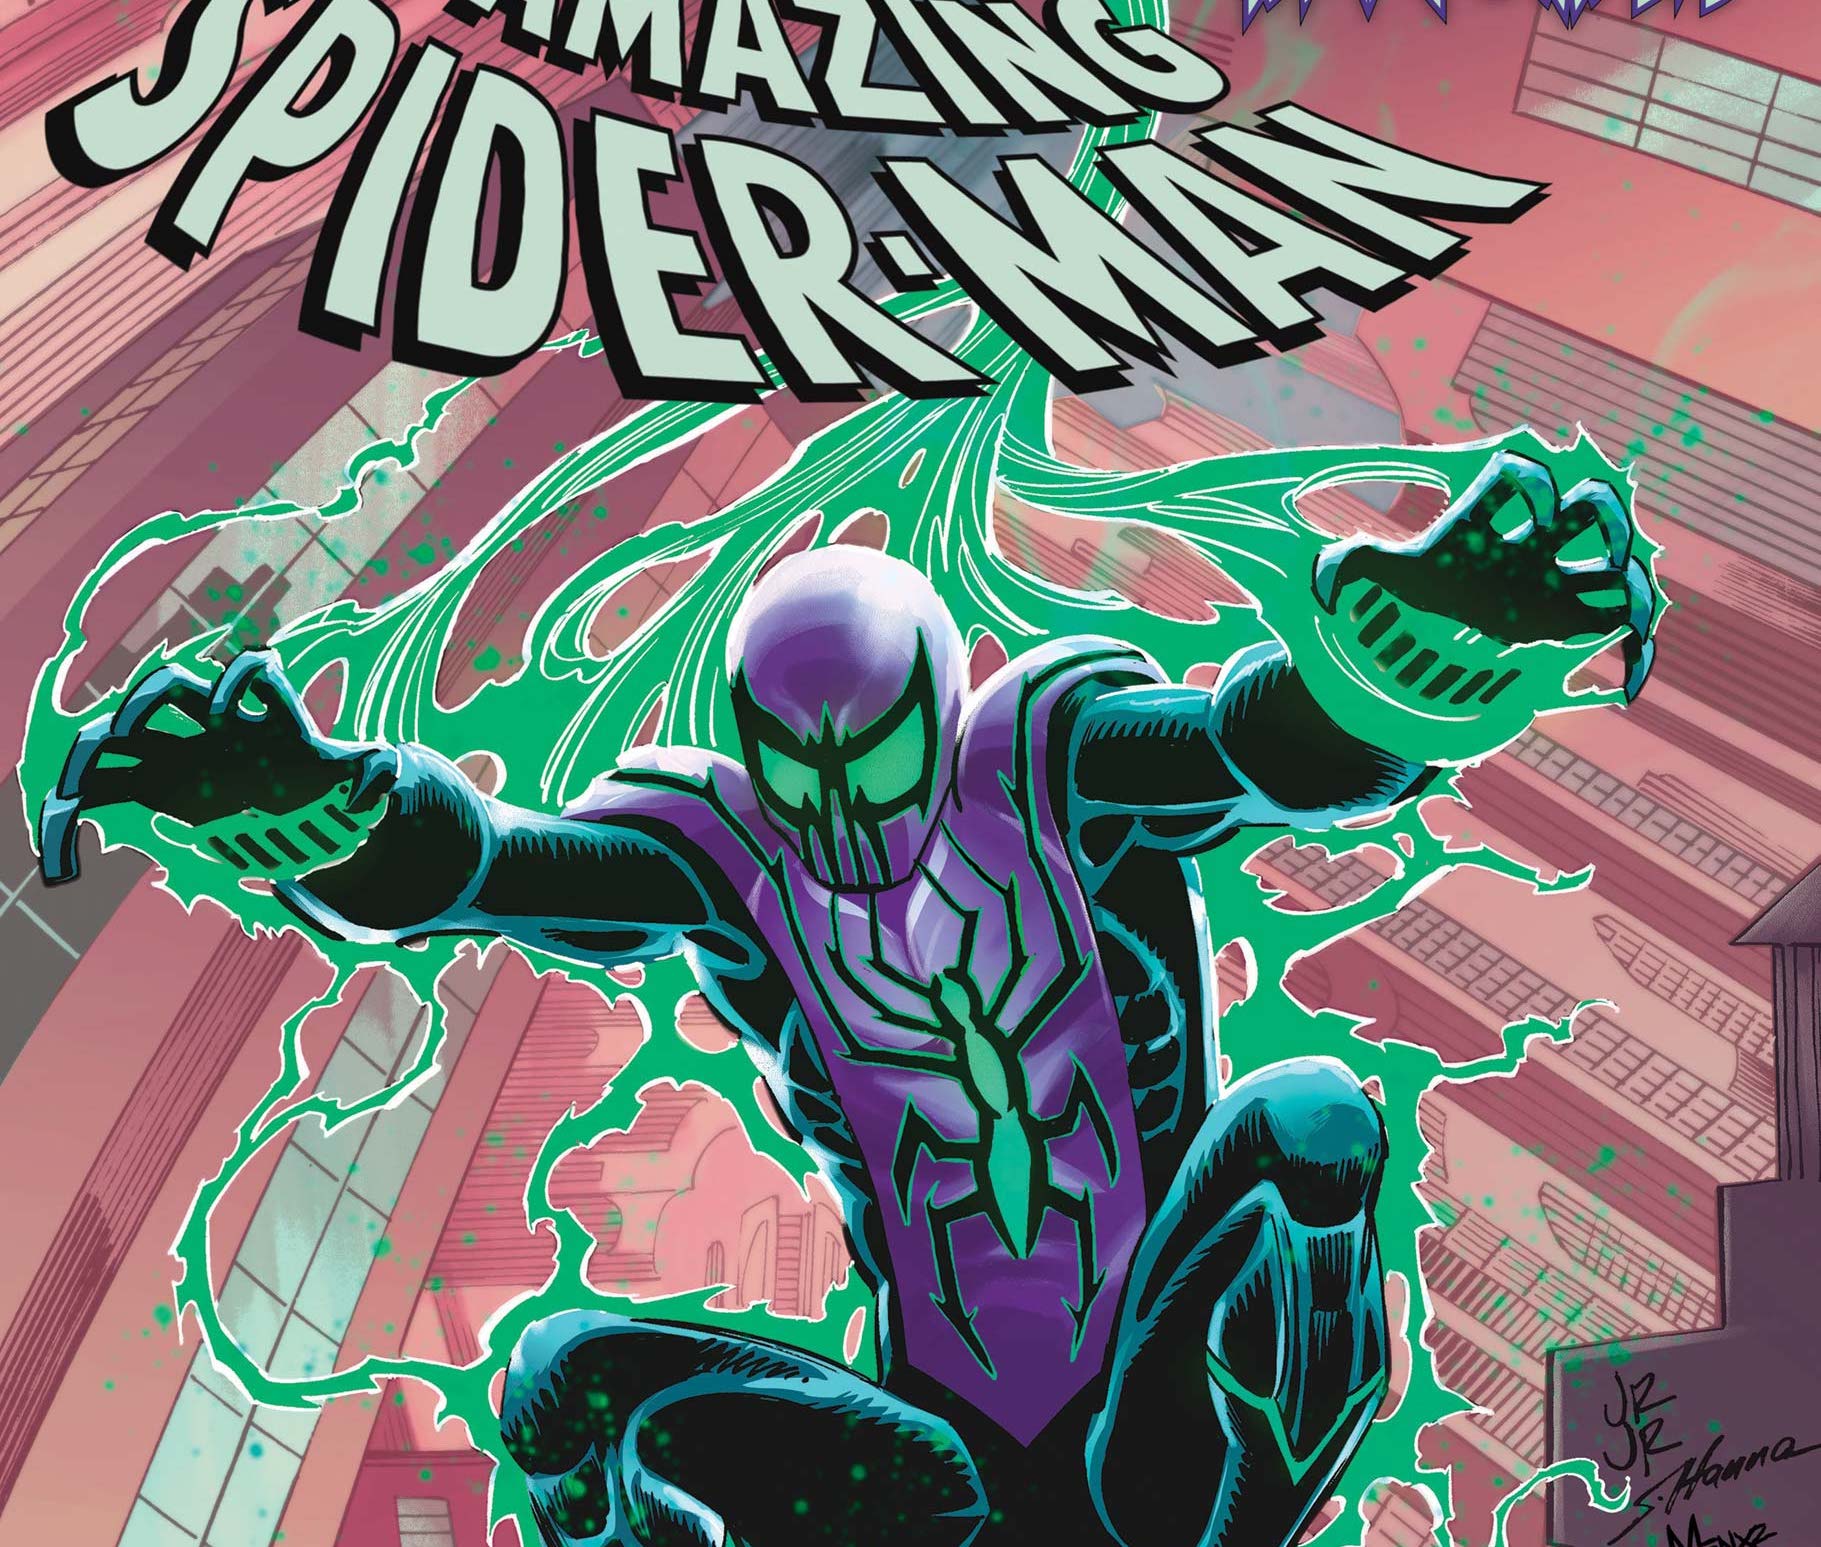 'Amazing Spider-Man' #14 prepares us for a clone saga playing off classic X-Men tales